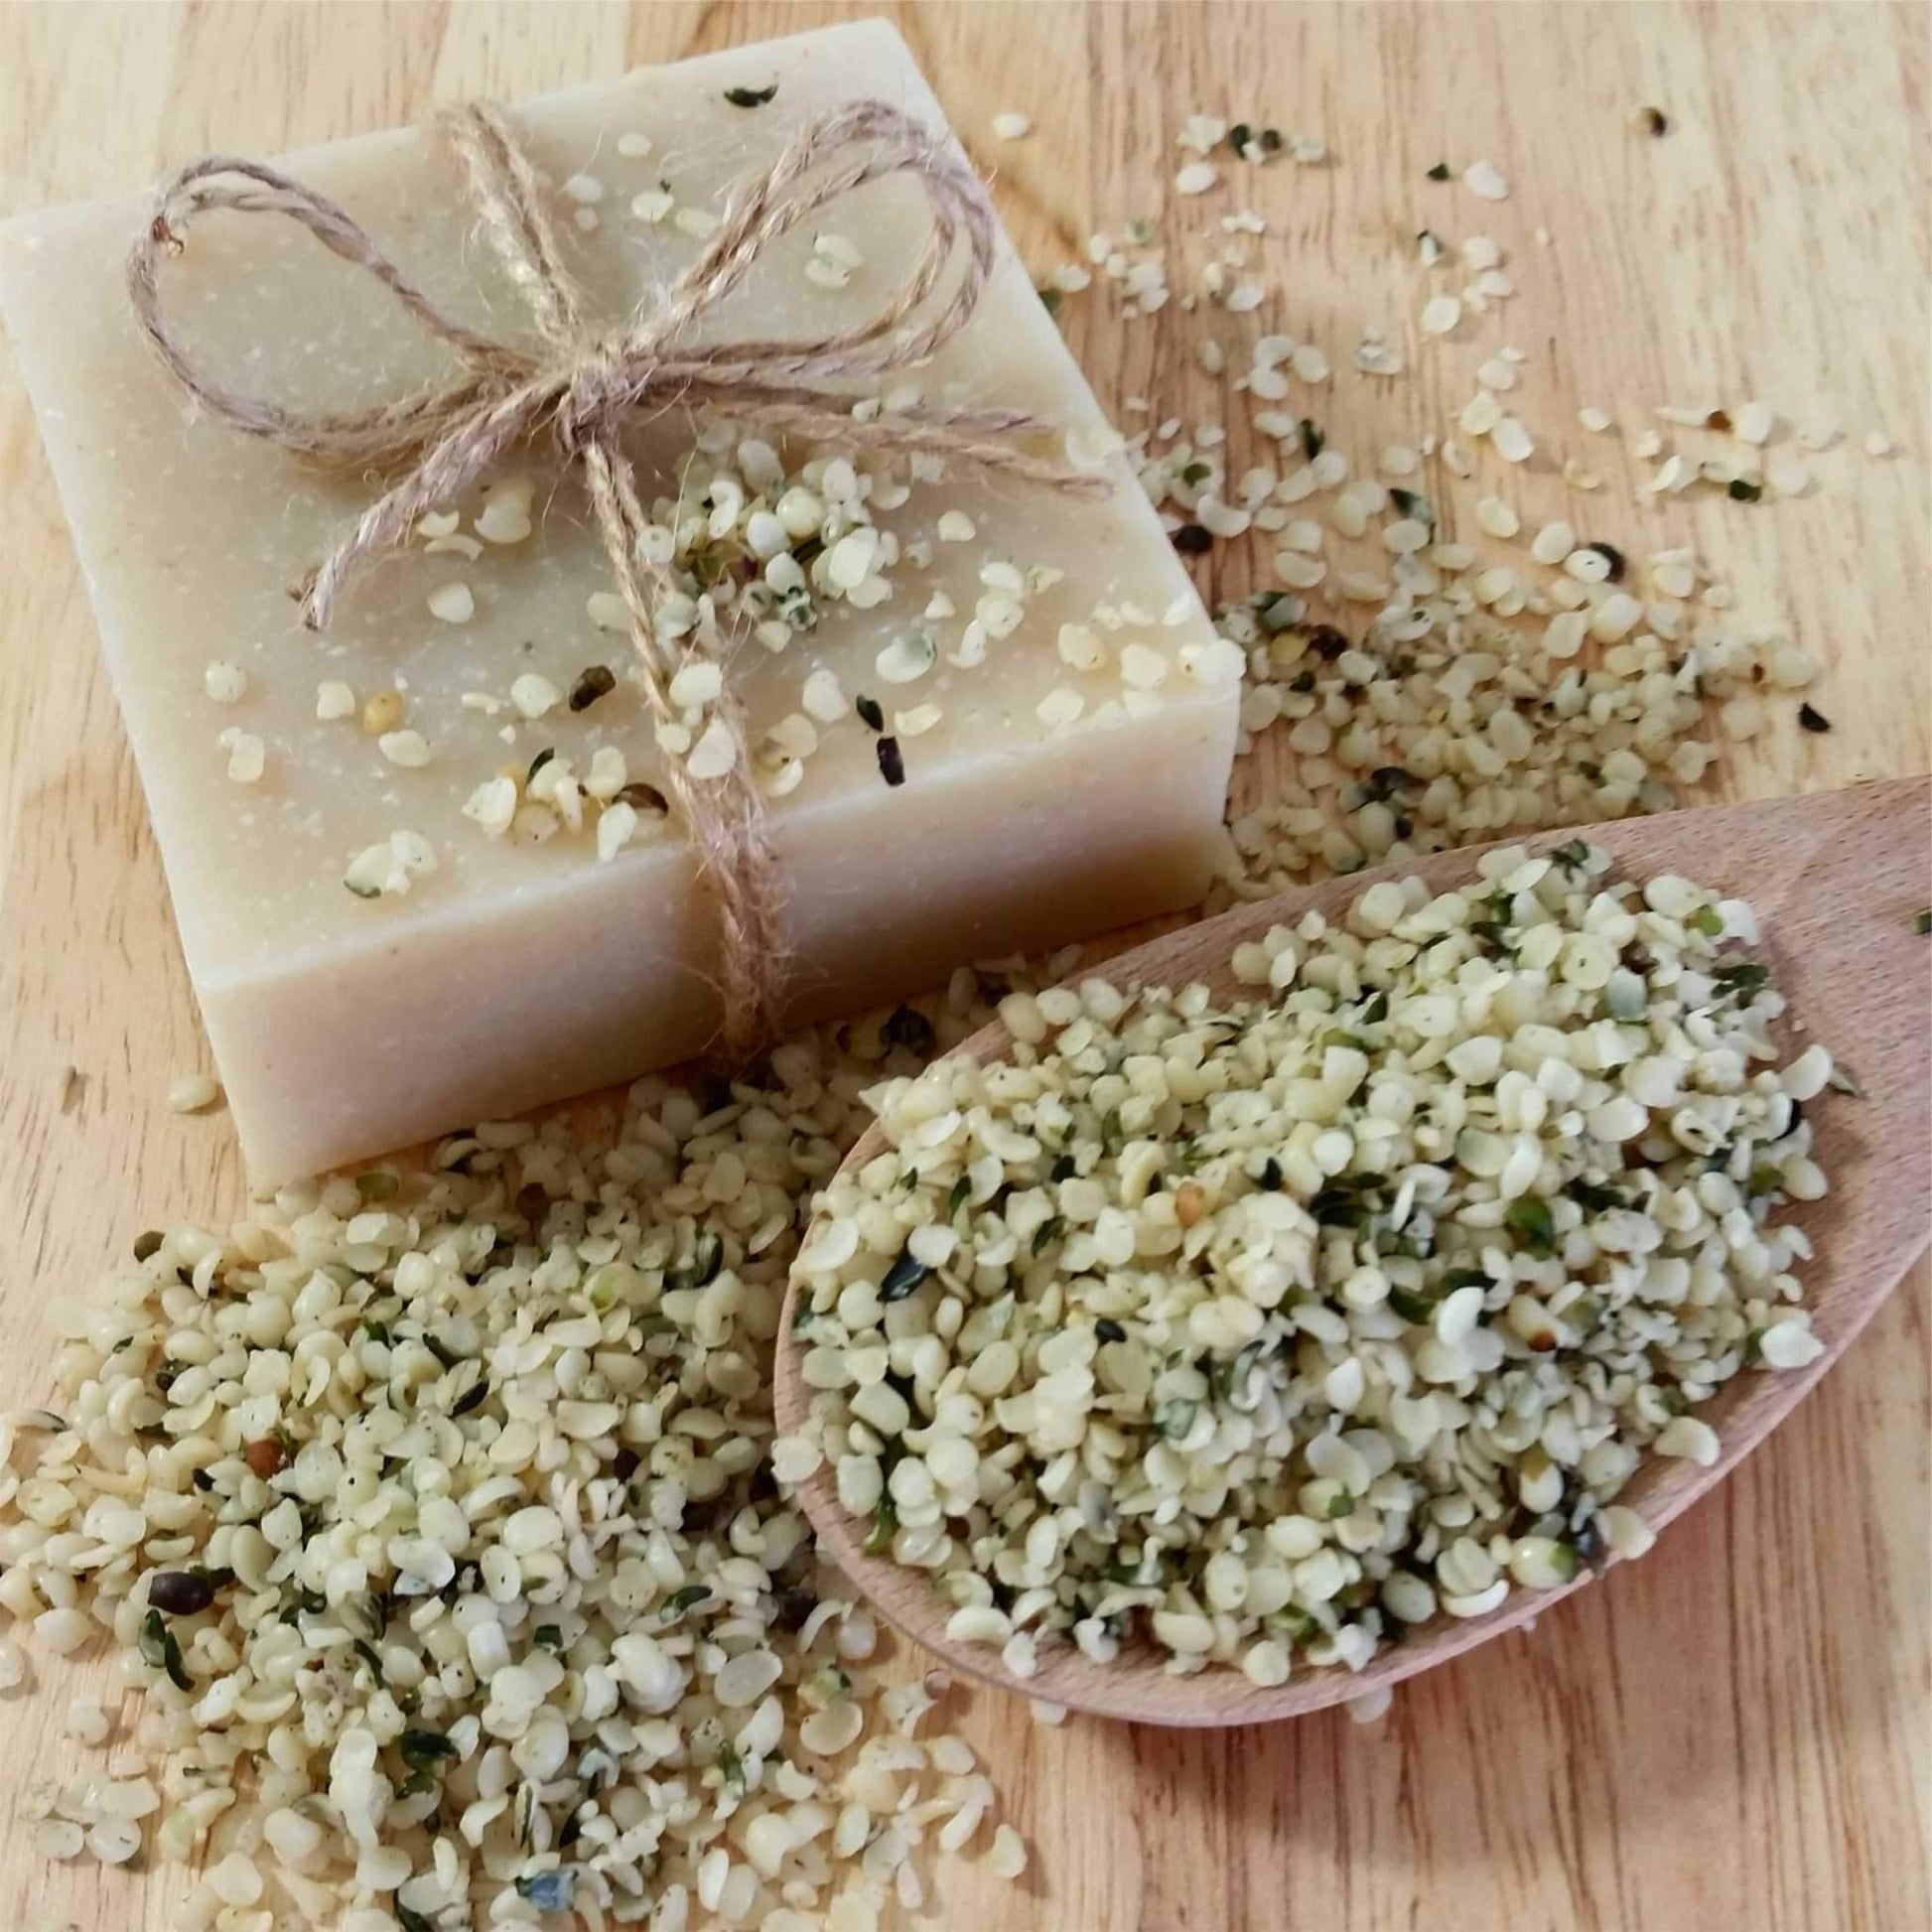 Hemp Milk Soap Bars - Unscented Value Pack 4 x 110g - Pure Scents